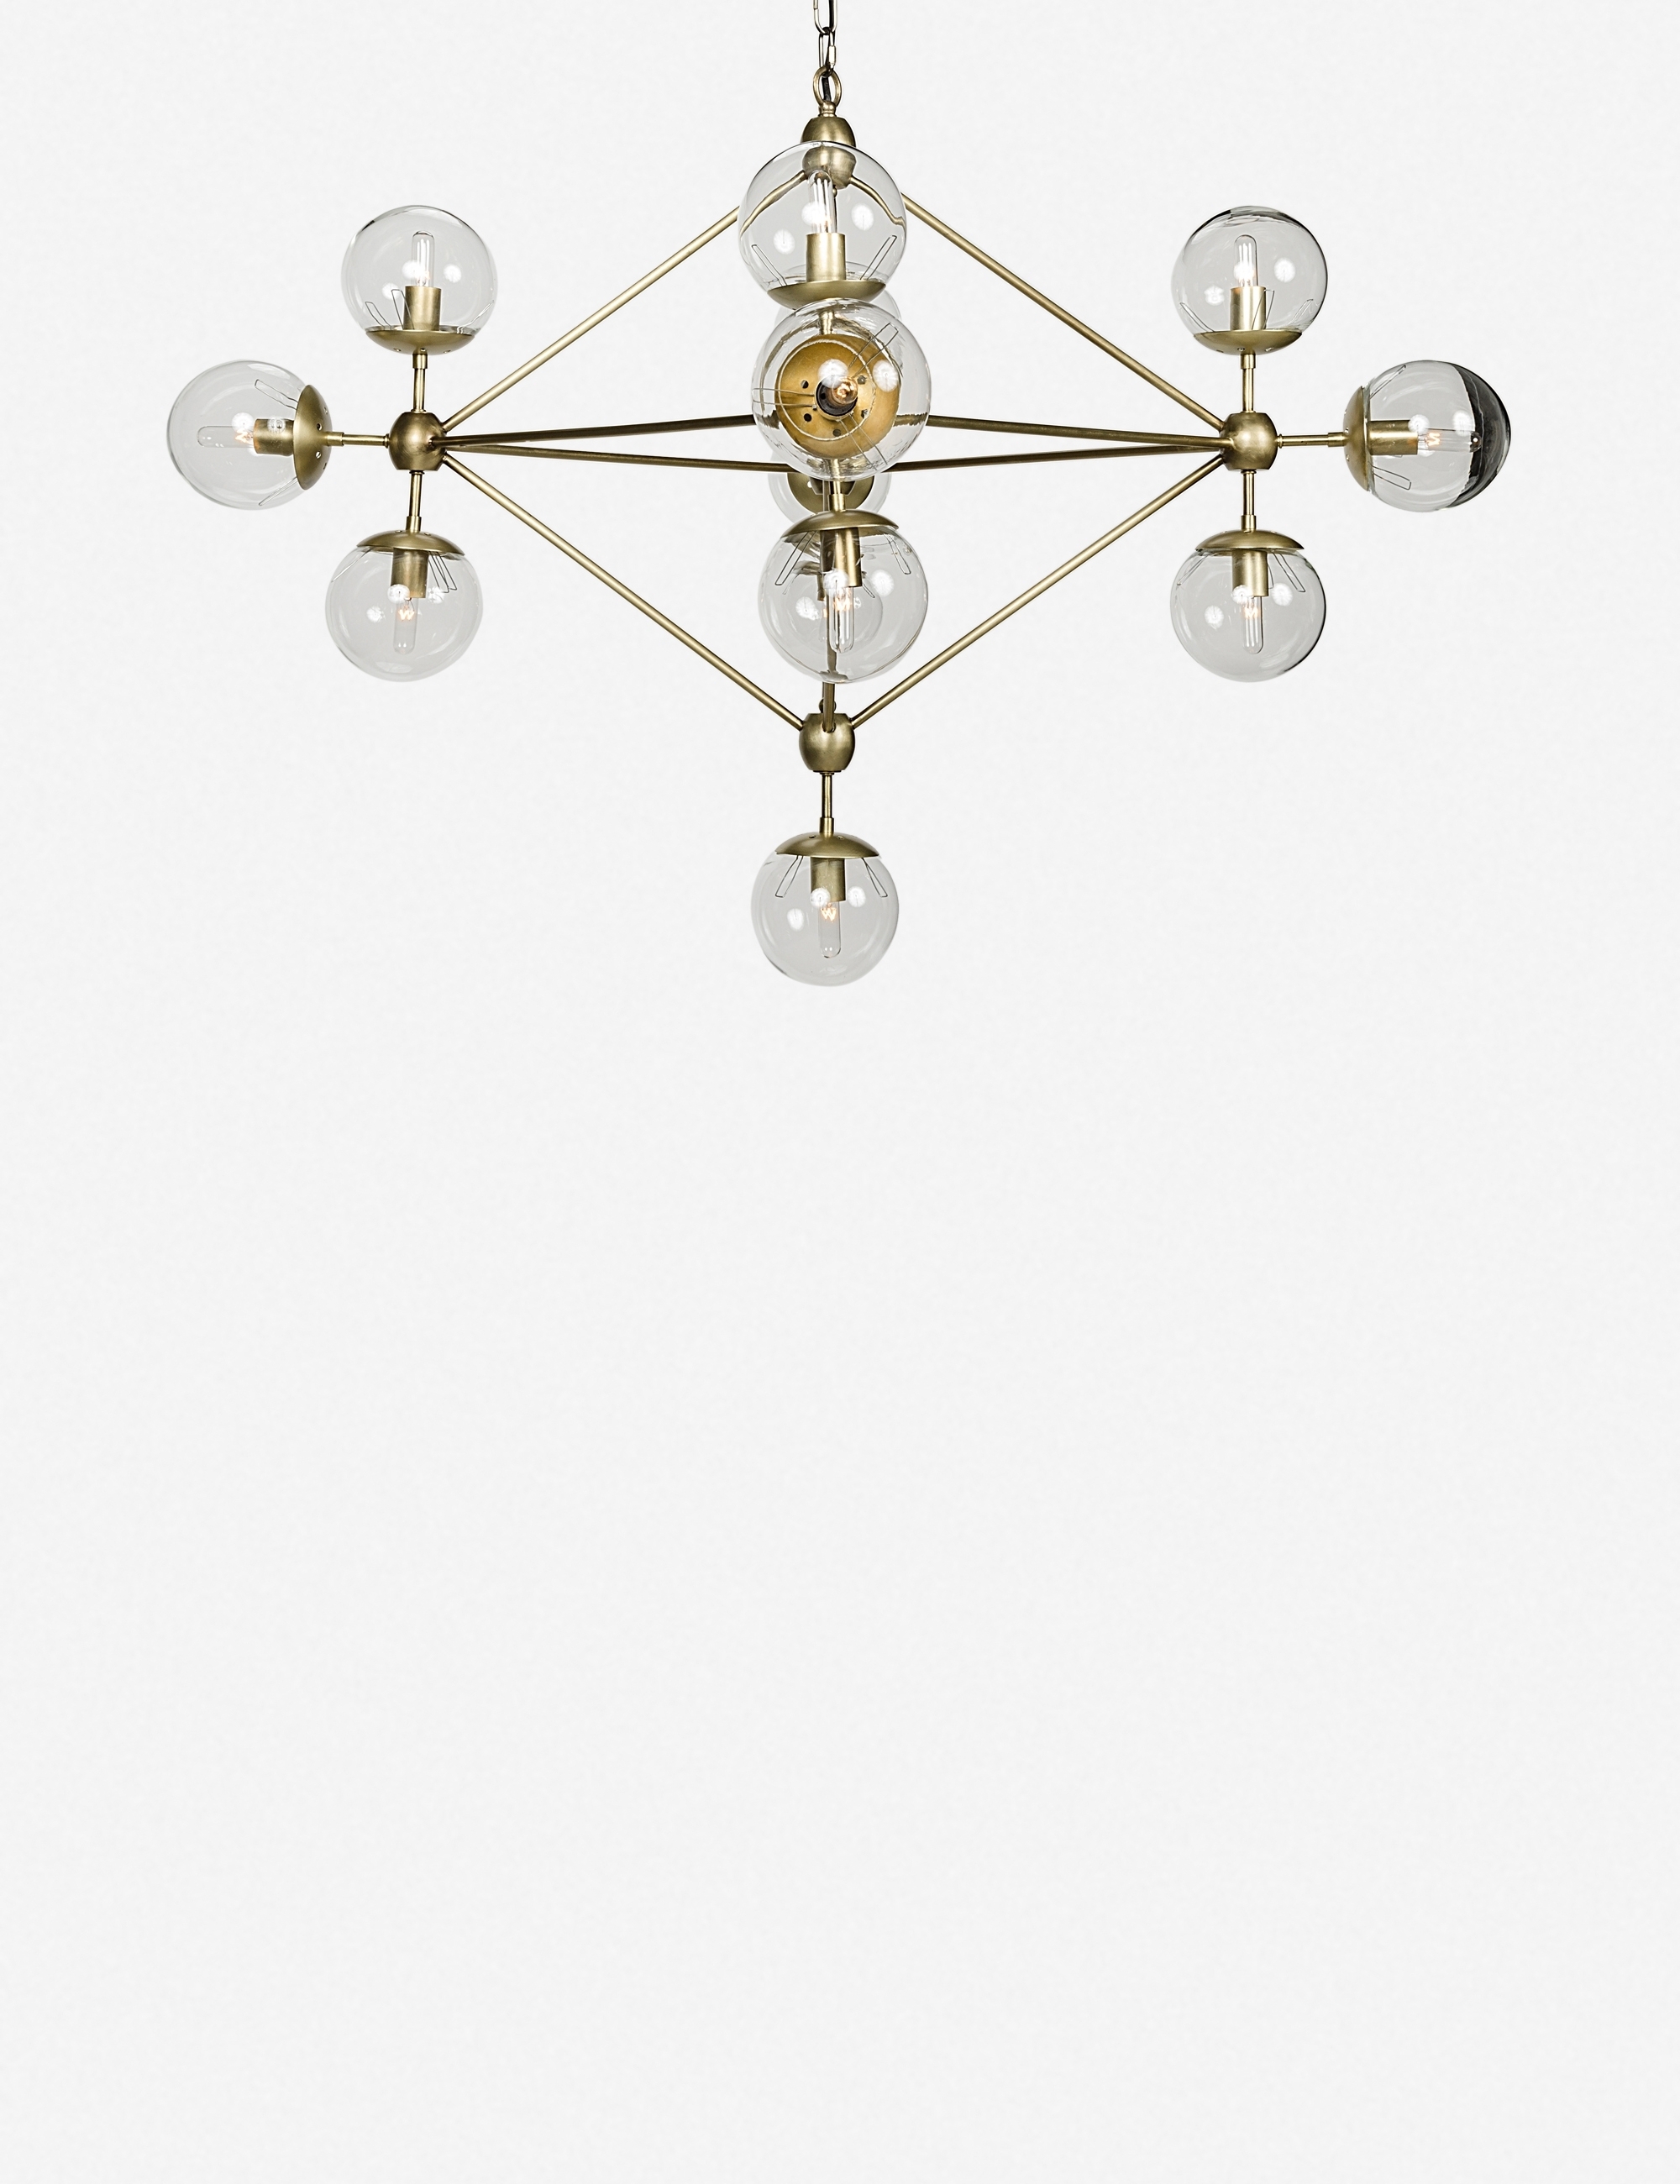 Cannon Chandelier - Image 0